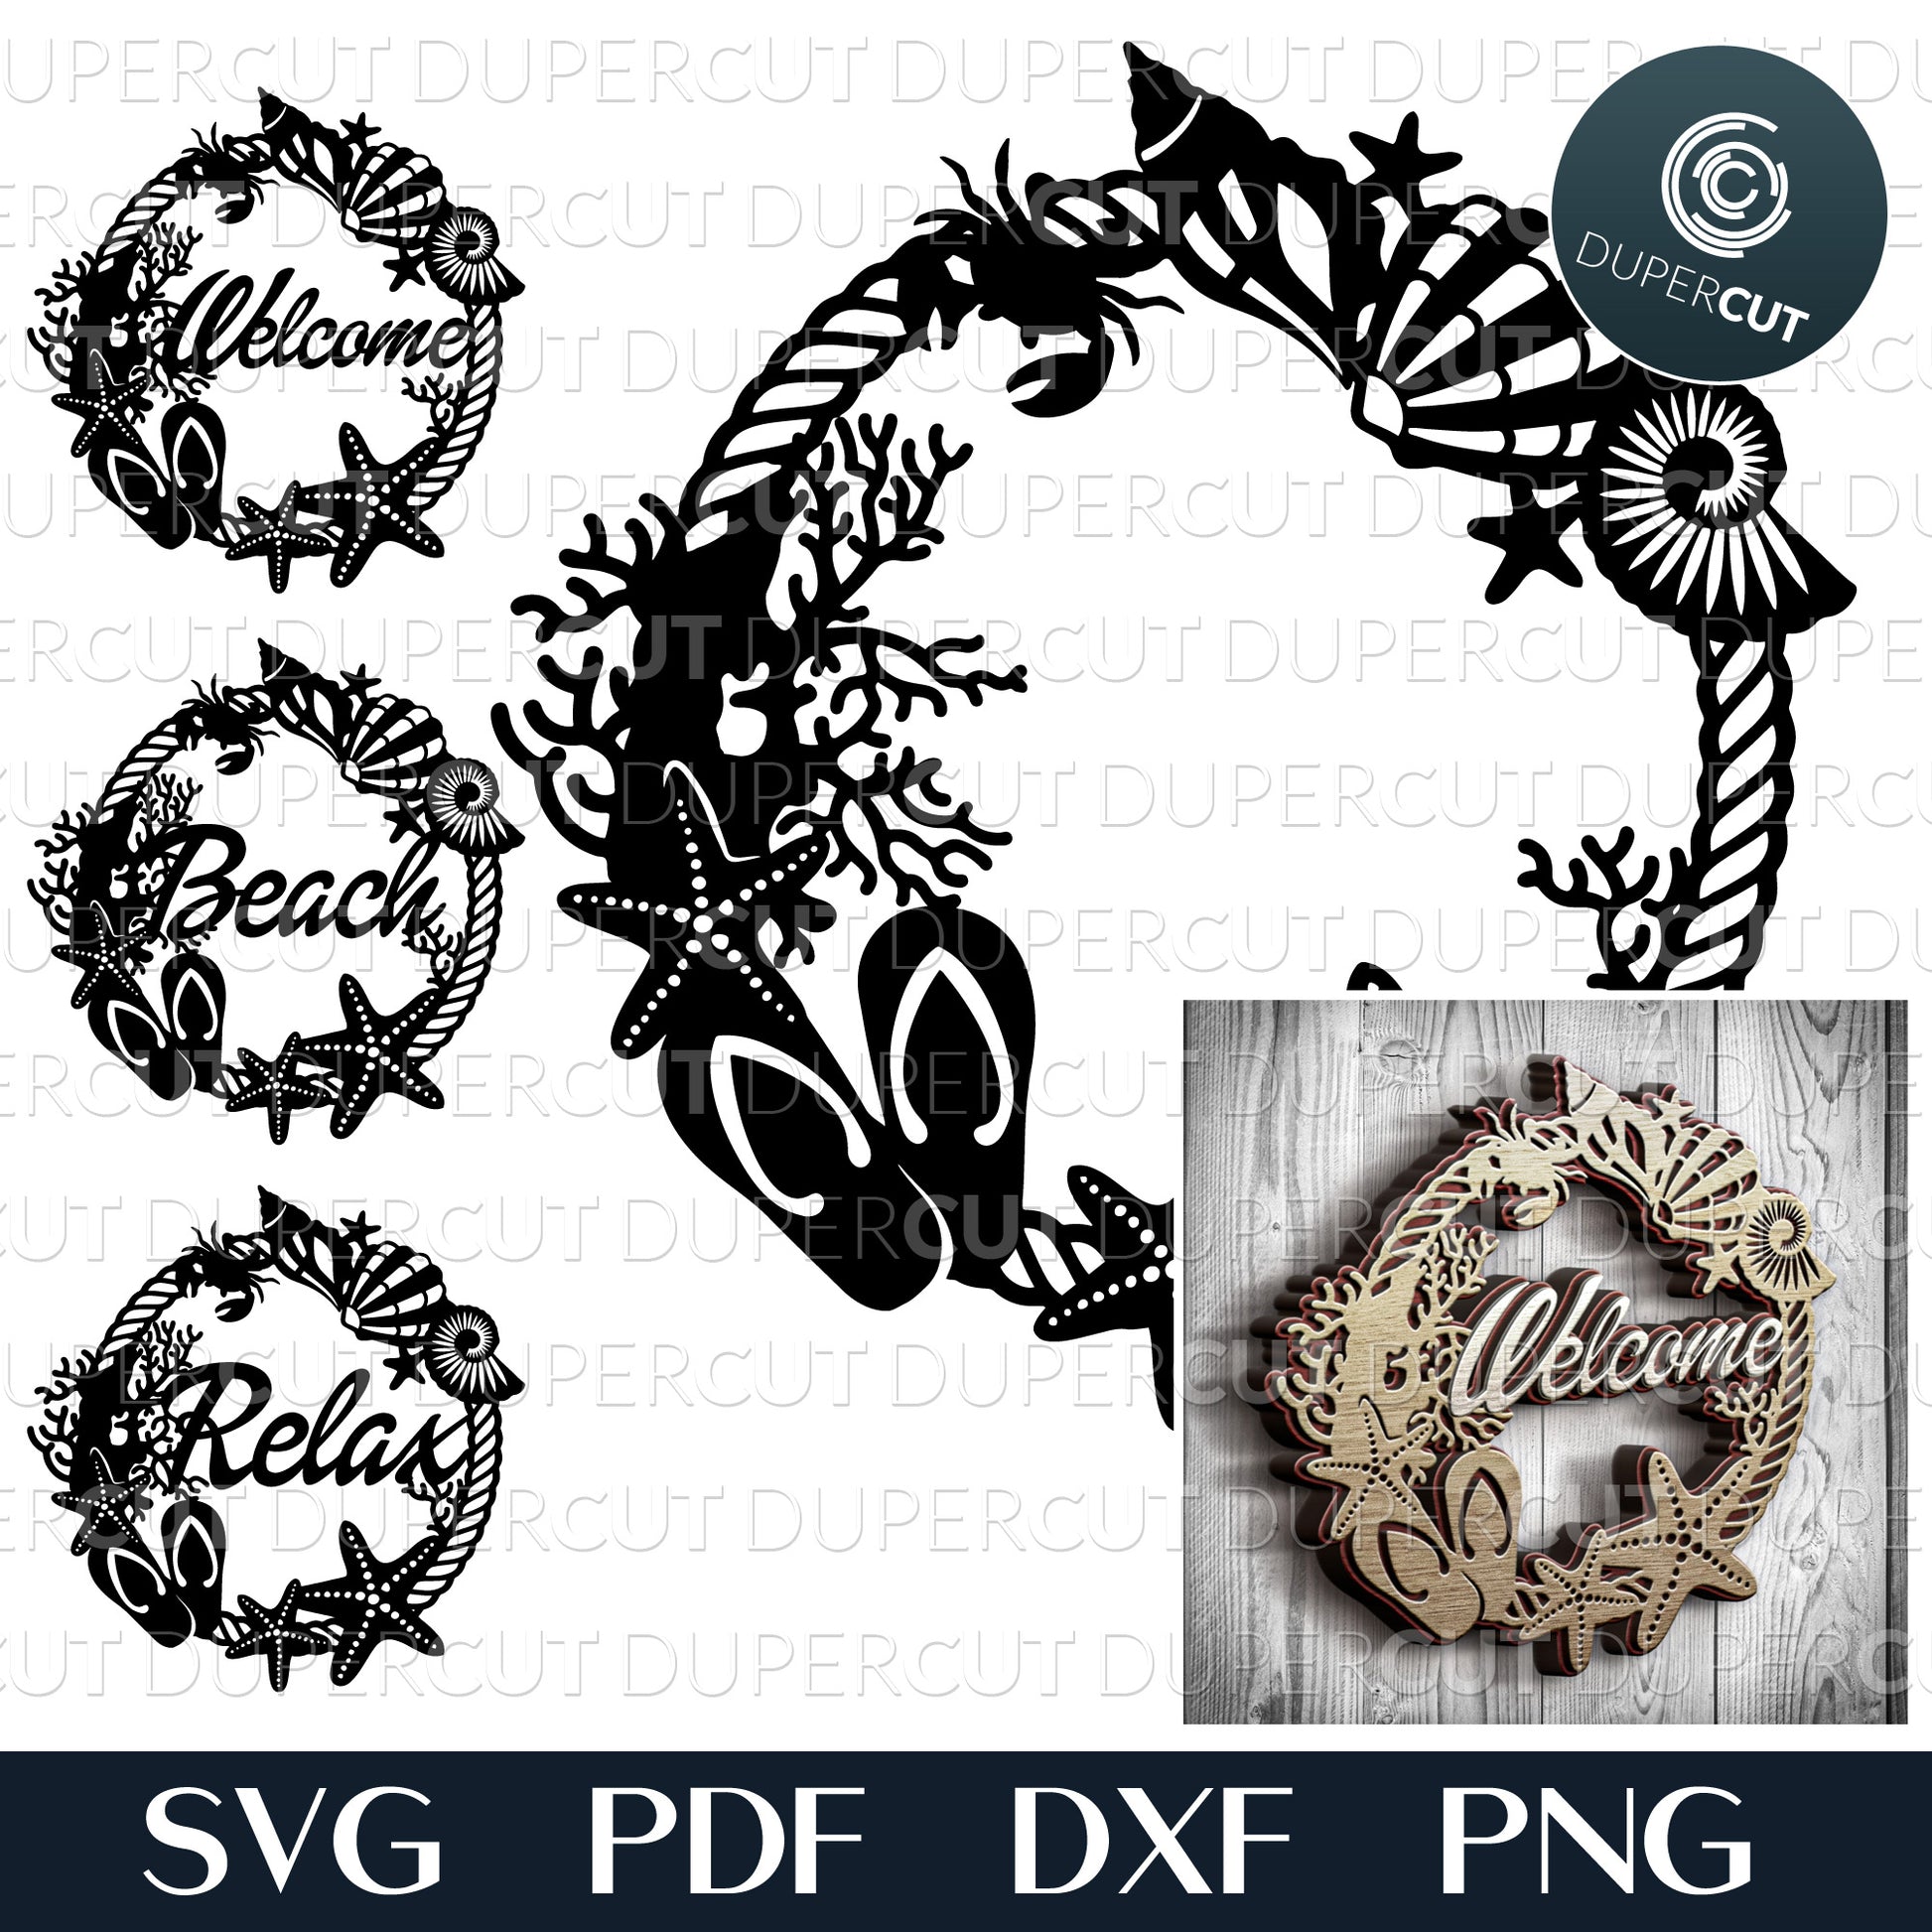 Layered laser files. Seashell wreaths bundle. SVG JPEG DXF files. Template for paper cutting, laser cutting. For use with Cricut, Glowforge, Silhouette Cameo, CNC machines. Personal or commercial license.